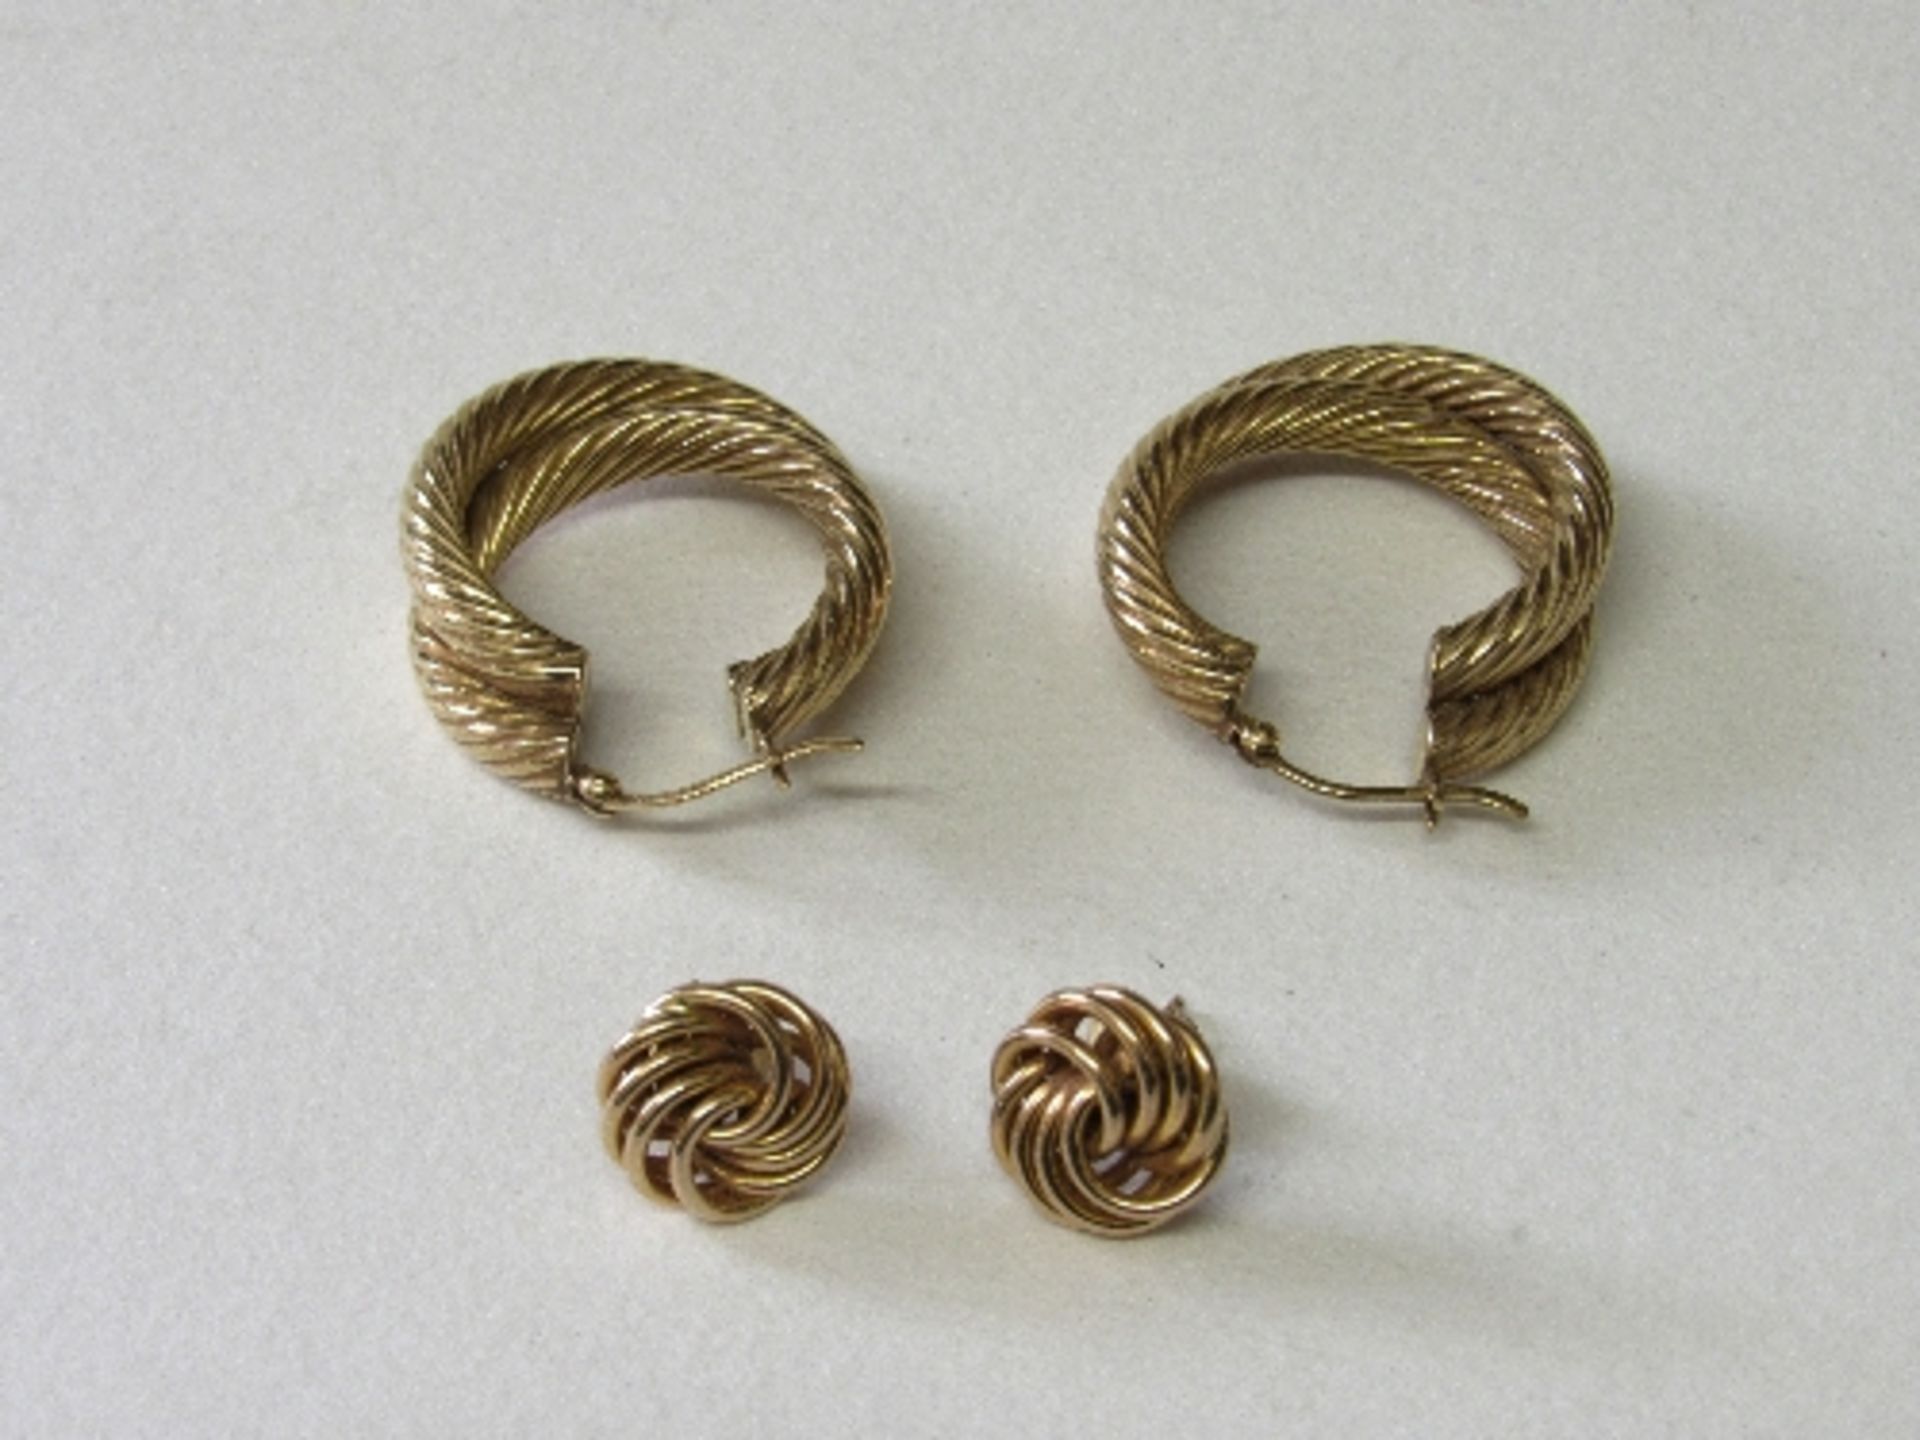 Pair of 9ct gold twisted loop earrings & a pair of 9ct gold knot earrings, total wt 6.8gms. Estimate